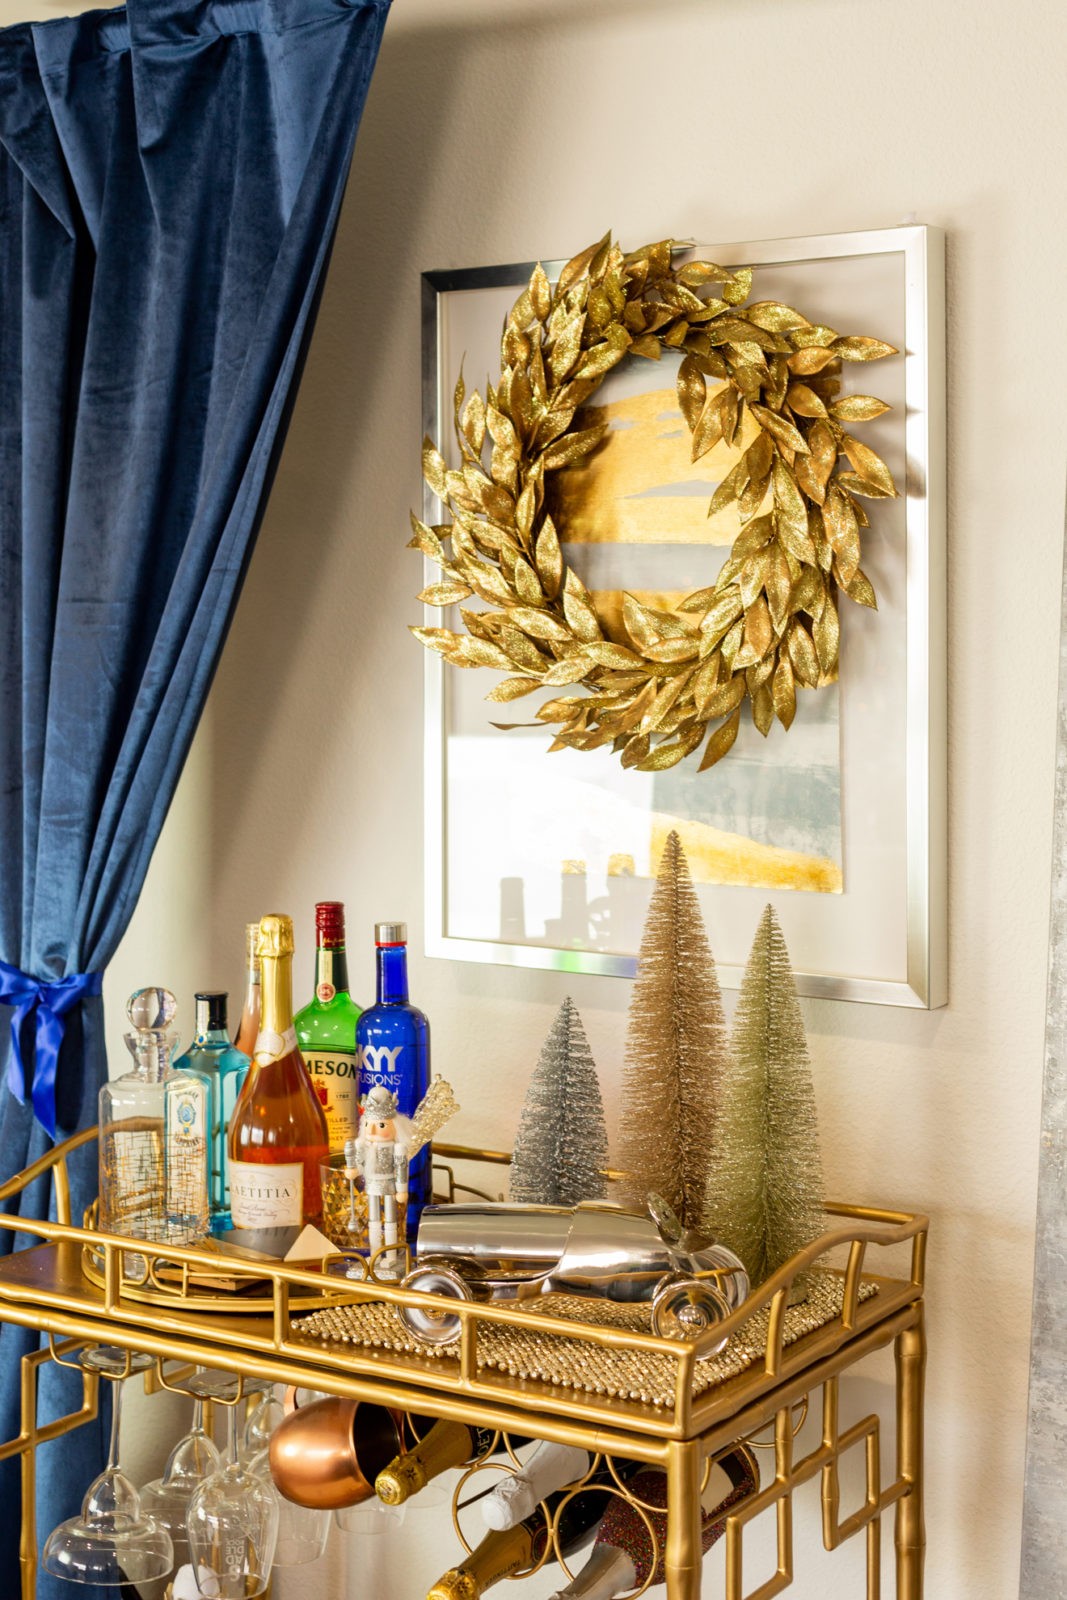 How to Decorate a Holiday Bar Cart in 5 Simple Steps by Home Decor Blogger Laura Lily | How to Decorate a Holiday Bar Cart in 5 Simple Steps by popular Los Angeles life and style blogger, Laura Lily: image of a gold bar cart with various alcoholic drinks, glasses, and holiday decor.